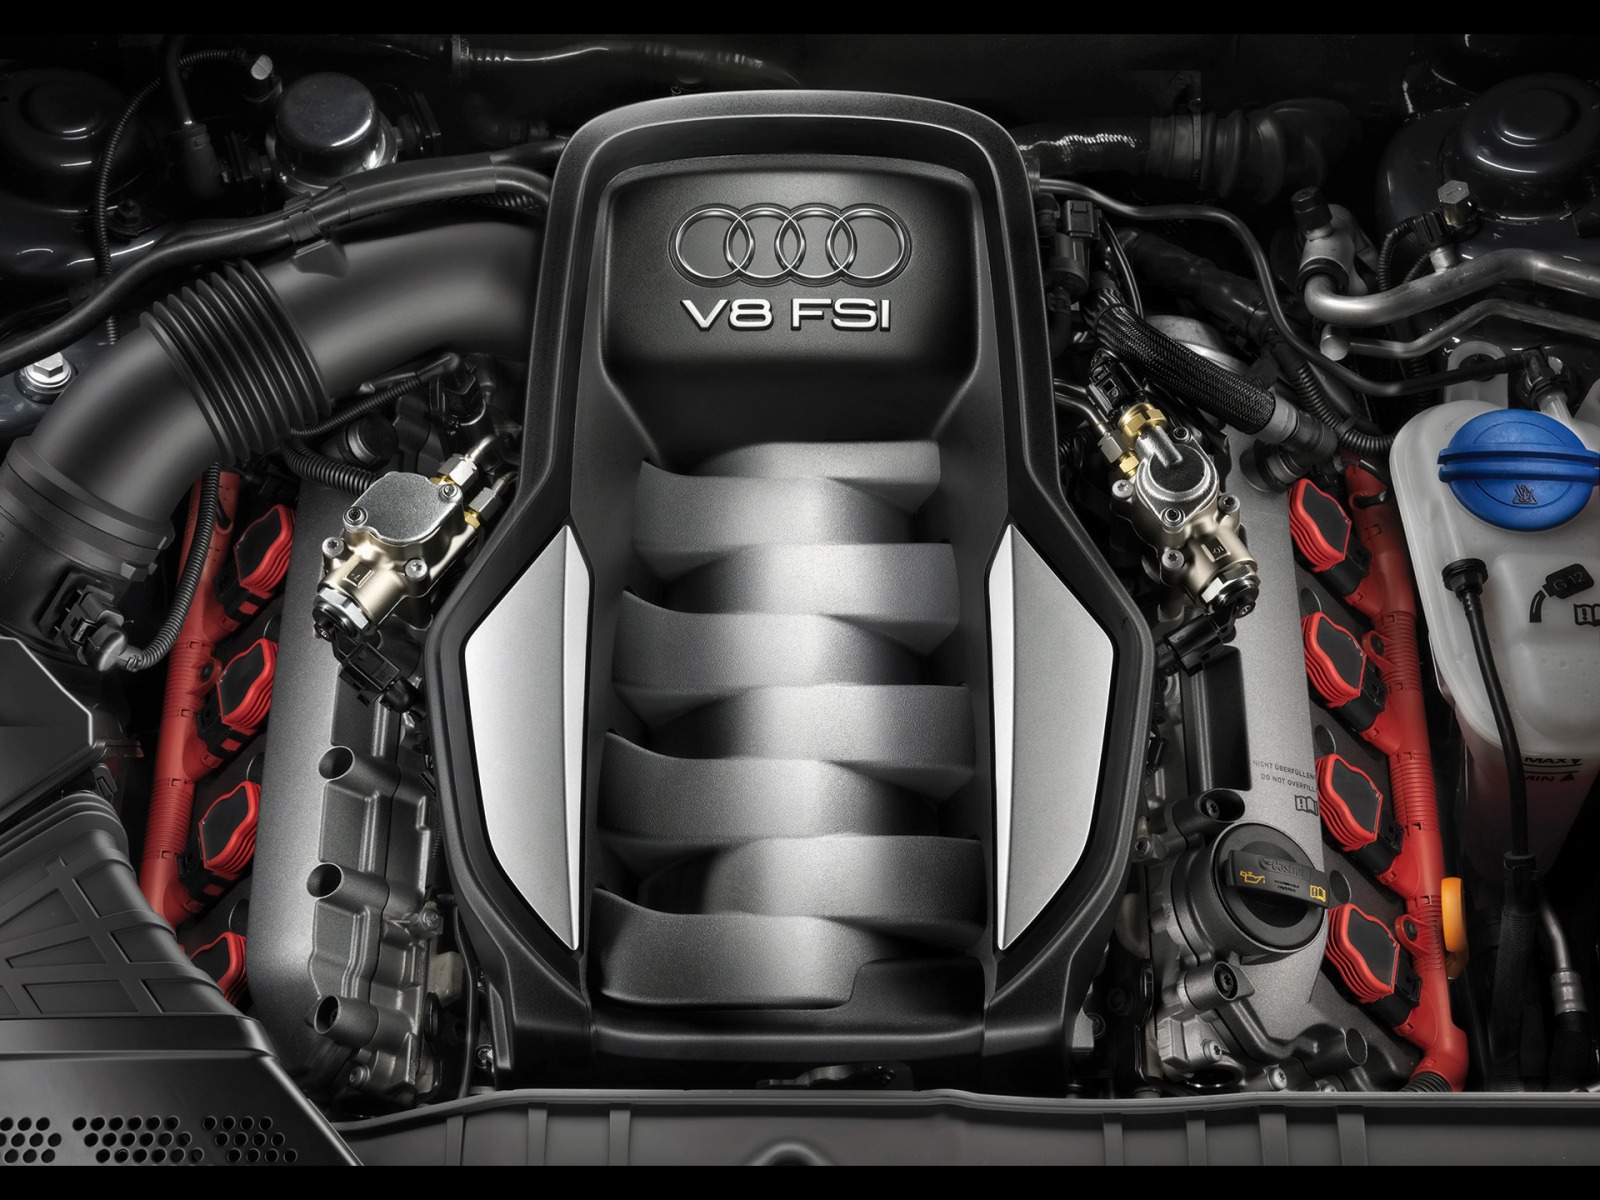 Audi A5 Engine Wallpaper Cars In Jpg Format For